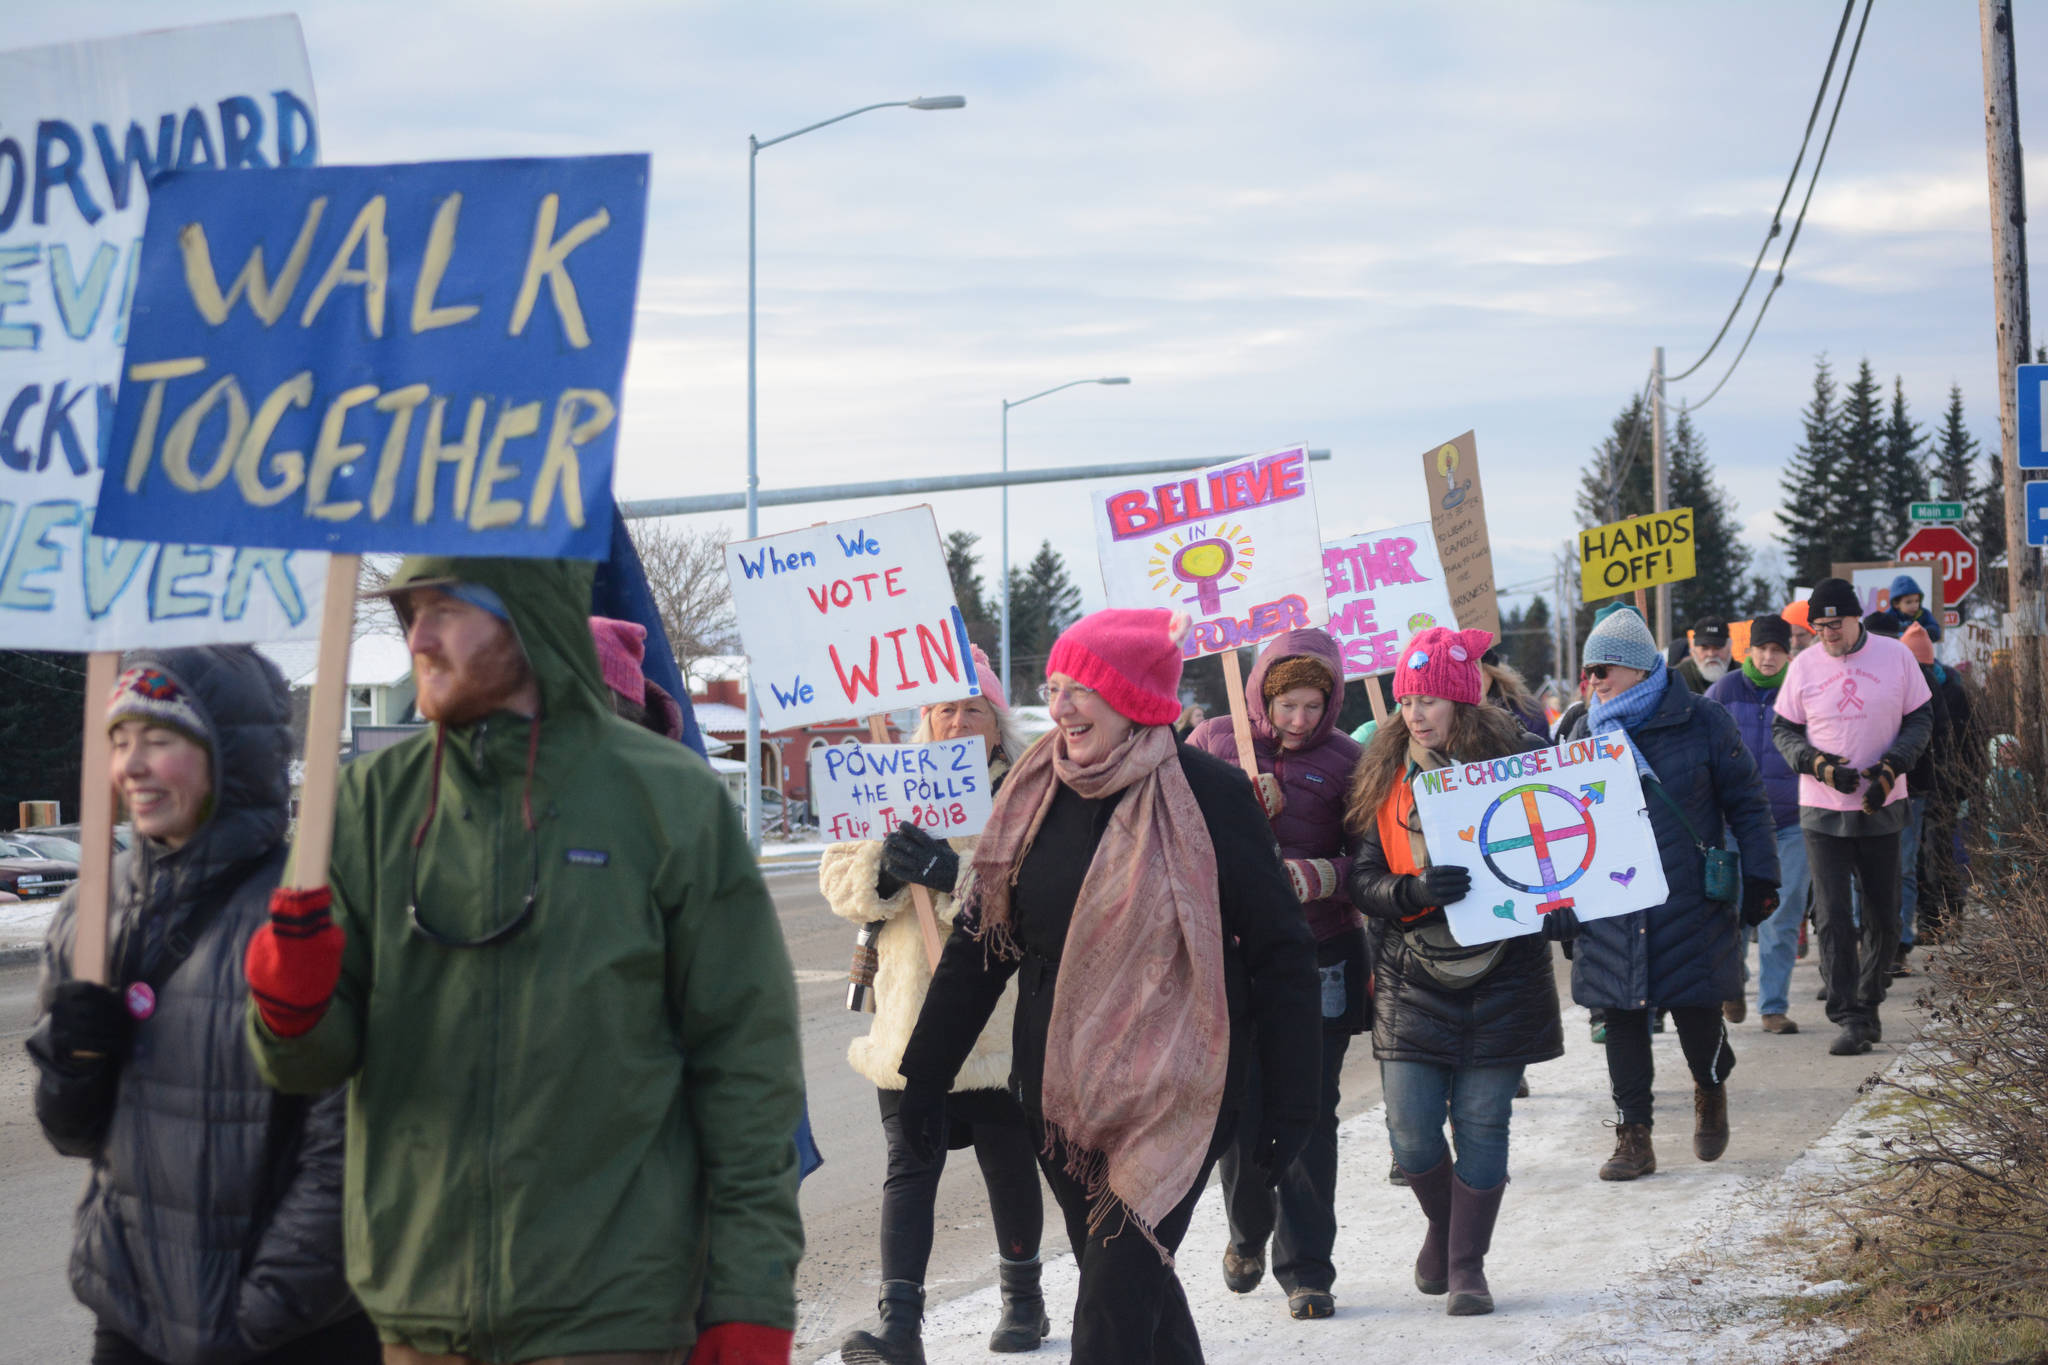 A line of protesters curves along Pioneer Avenue in the Homer March for Women on Saturday. About 700 people walked in the march along Pioneer Avenue on Jan. 20, 2018, in Homer, Alaska. The group of marchers extended from Main Street to Kachemak Way. (Photo by Michael Armstrong/Homer News)